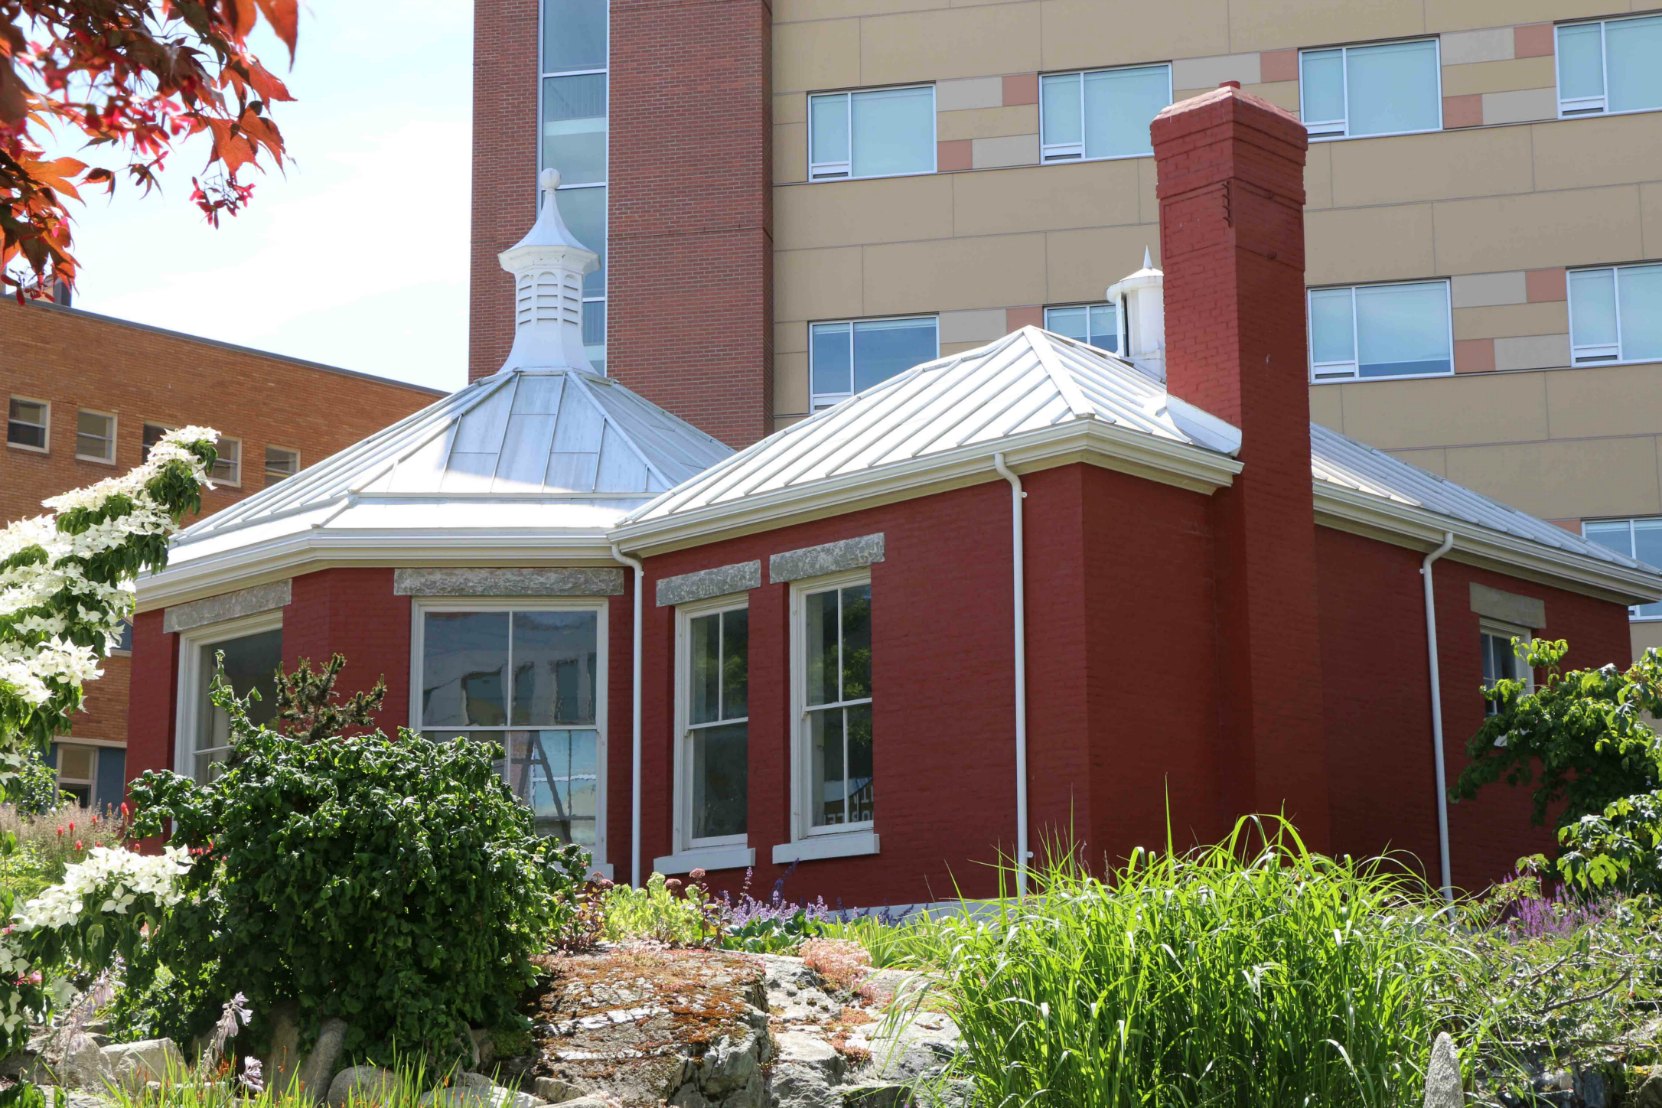 The Pemberton Memorial Operating Room at the Royal Jubilee Hospital was declared a National Historic Site of Canada in 2009.